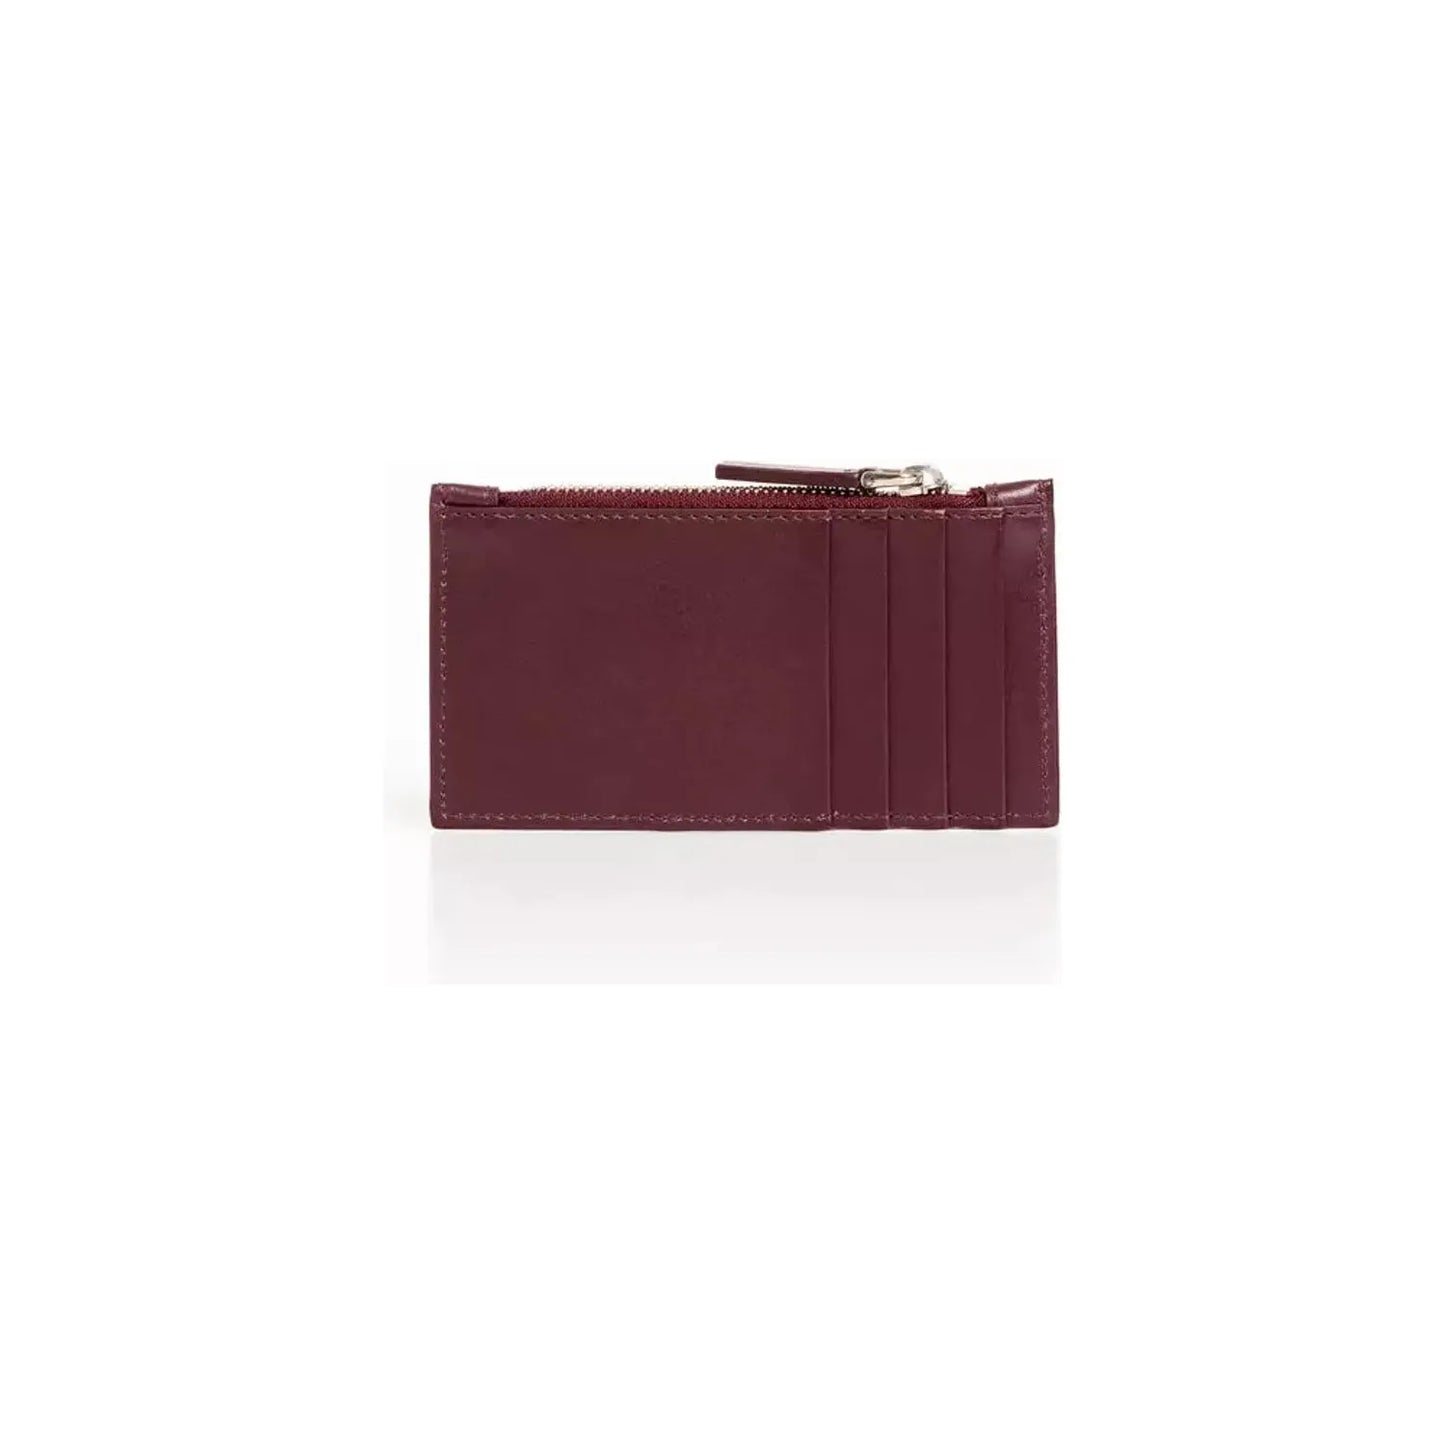 Trussardi Elegant Soft Leather Card Holder in Rich Brown Wallet r-wallet-6 stock_product_image_21579_1058335590-24-67fea2cc-20d.webp